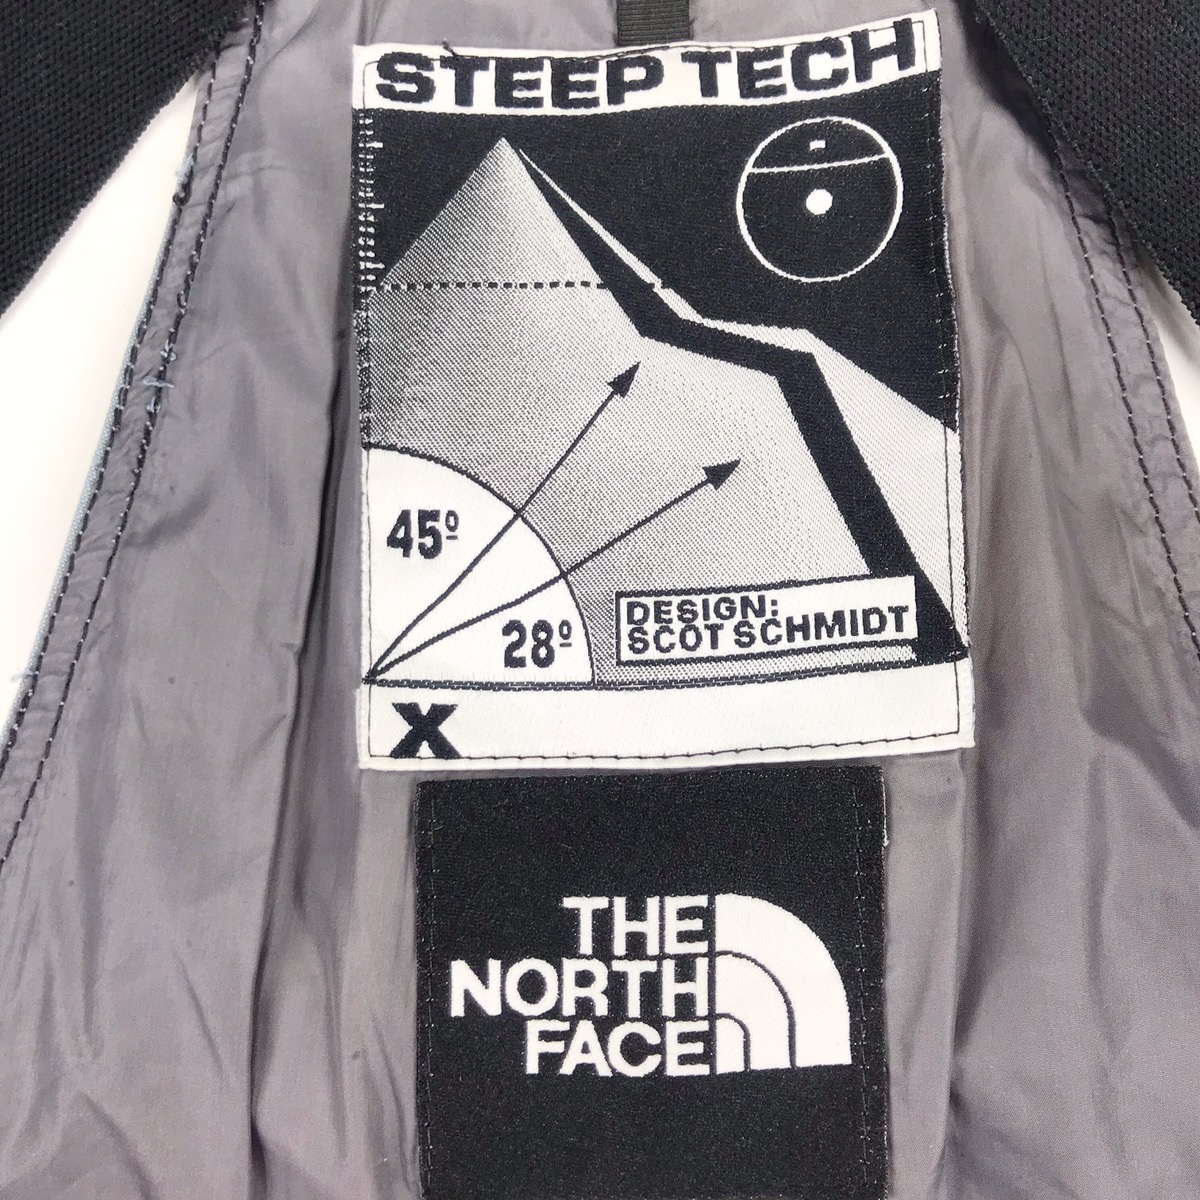 Outdoor Style Go Out! - Vintage The North Face Steep Tech Jumpsuits Ski Pants - 15